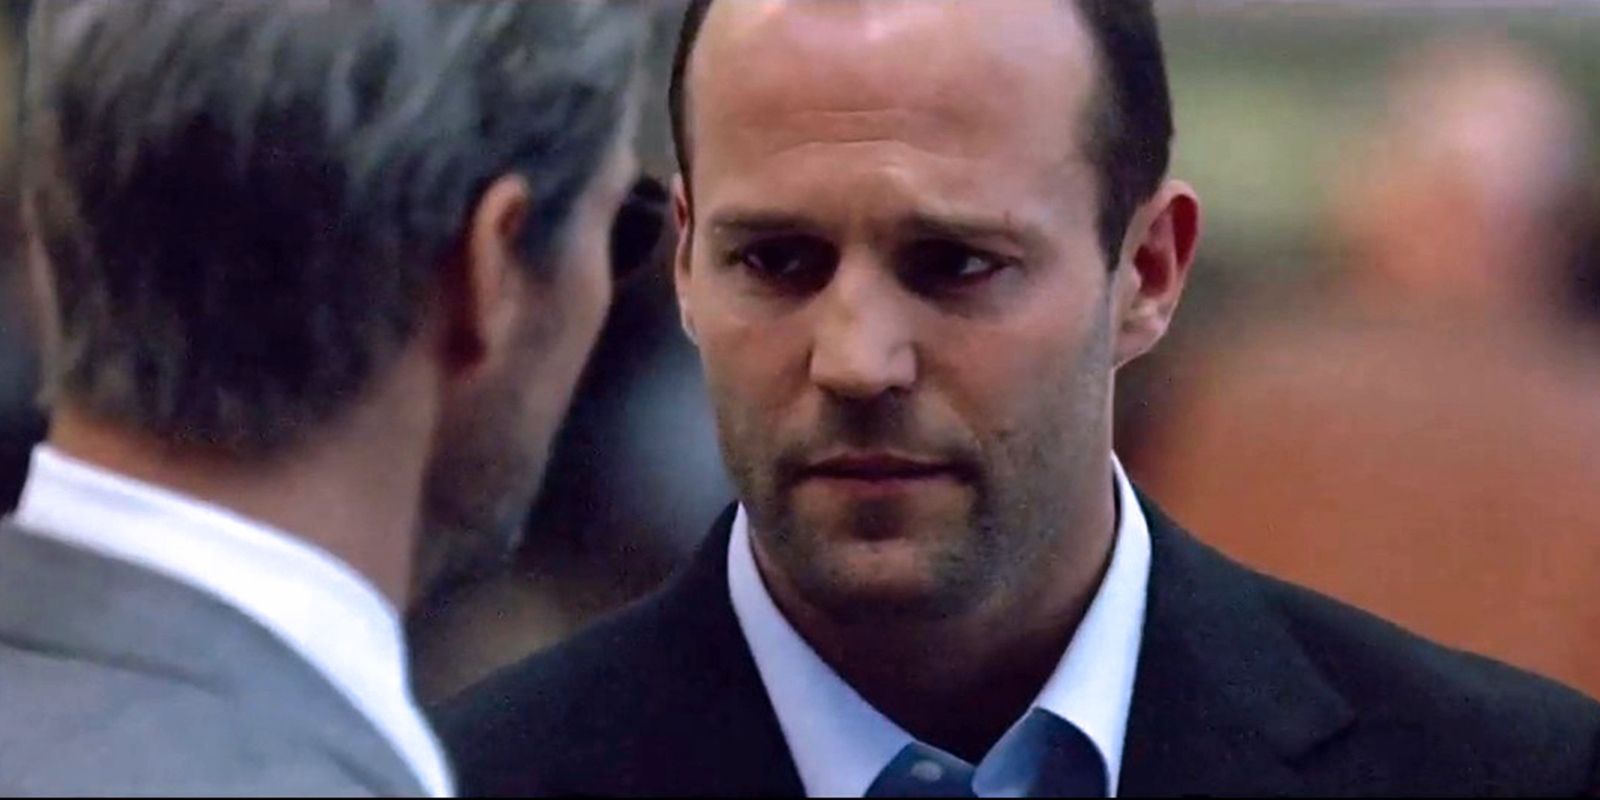 Jason Statham with Tom Cruise in Collateral